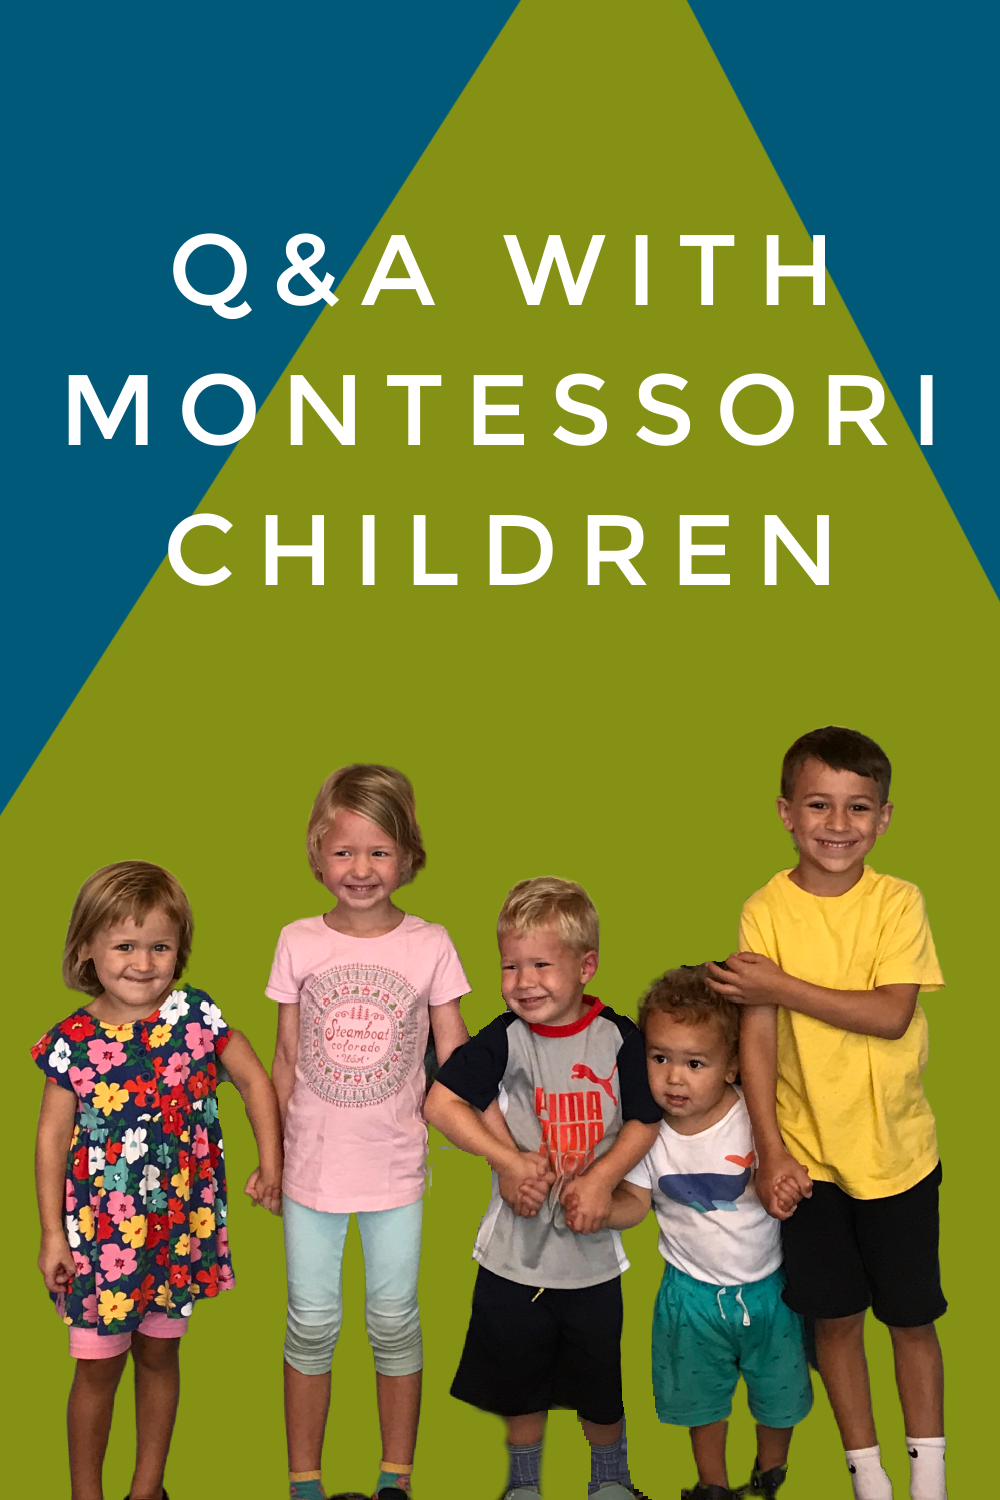 In this Montessori parenting podcast we hear from several Montessori children about their experiences living in a Montessori home.